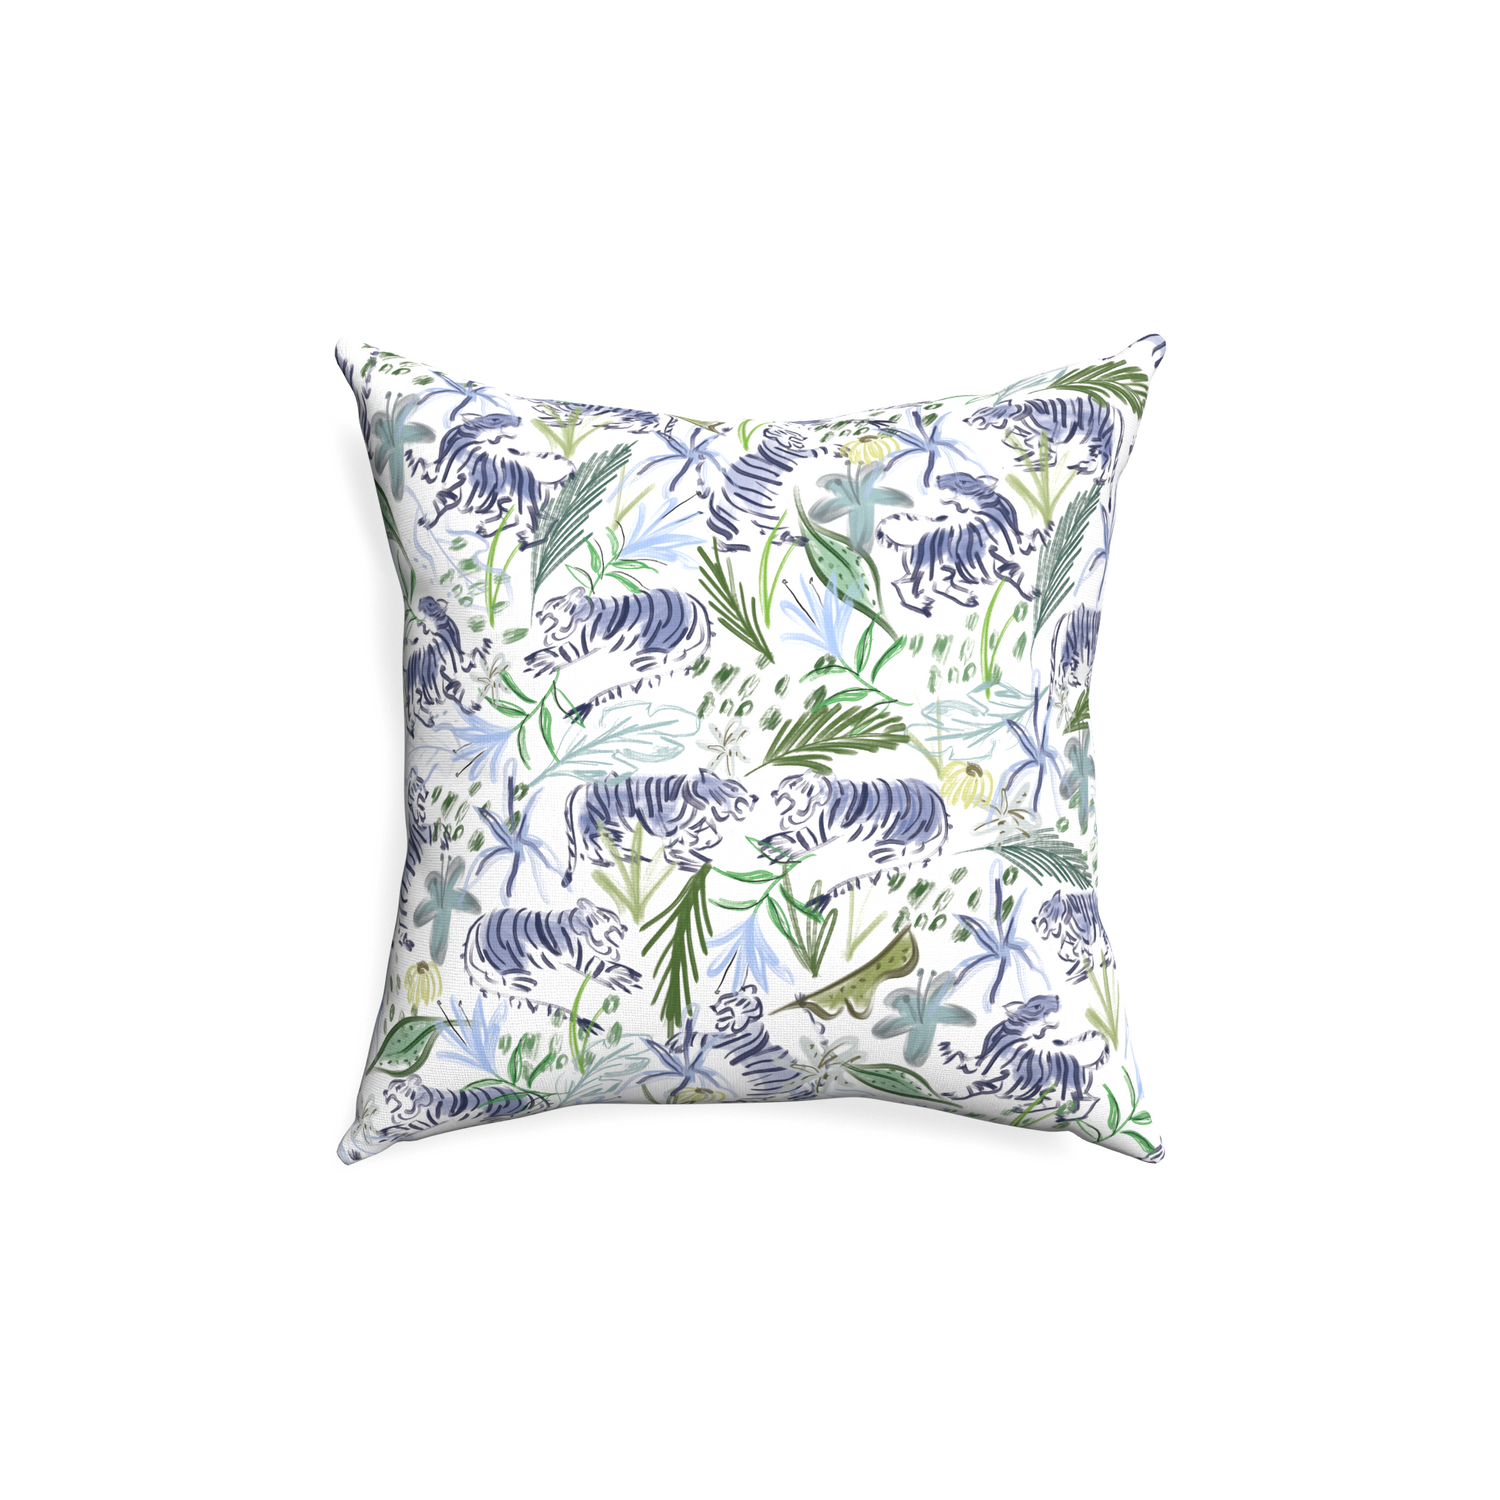 18-square frida green custom pillow with none on white background